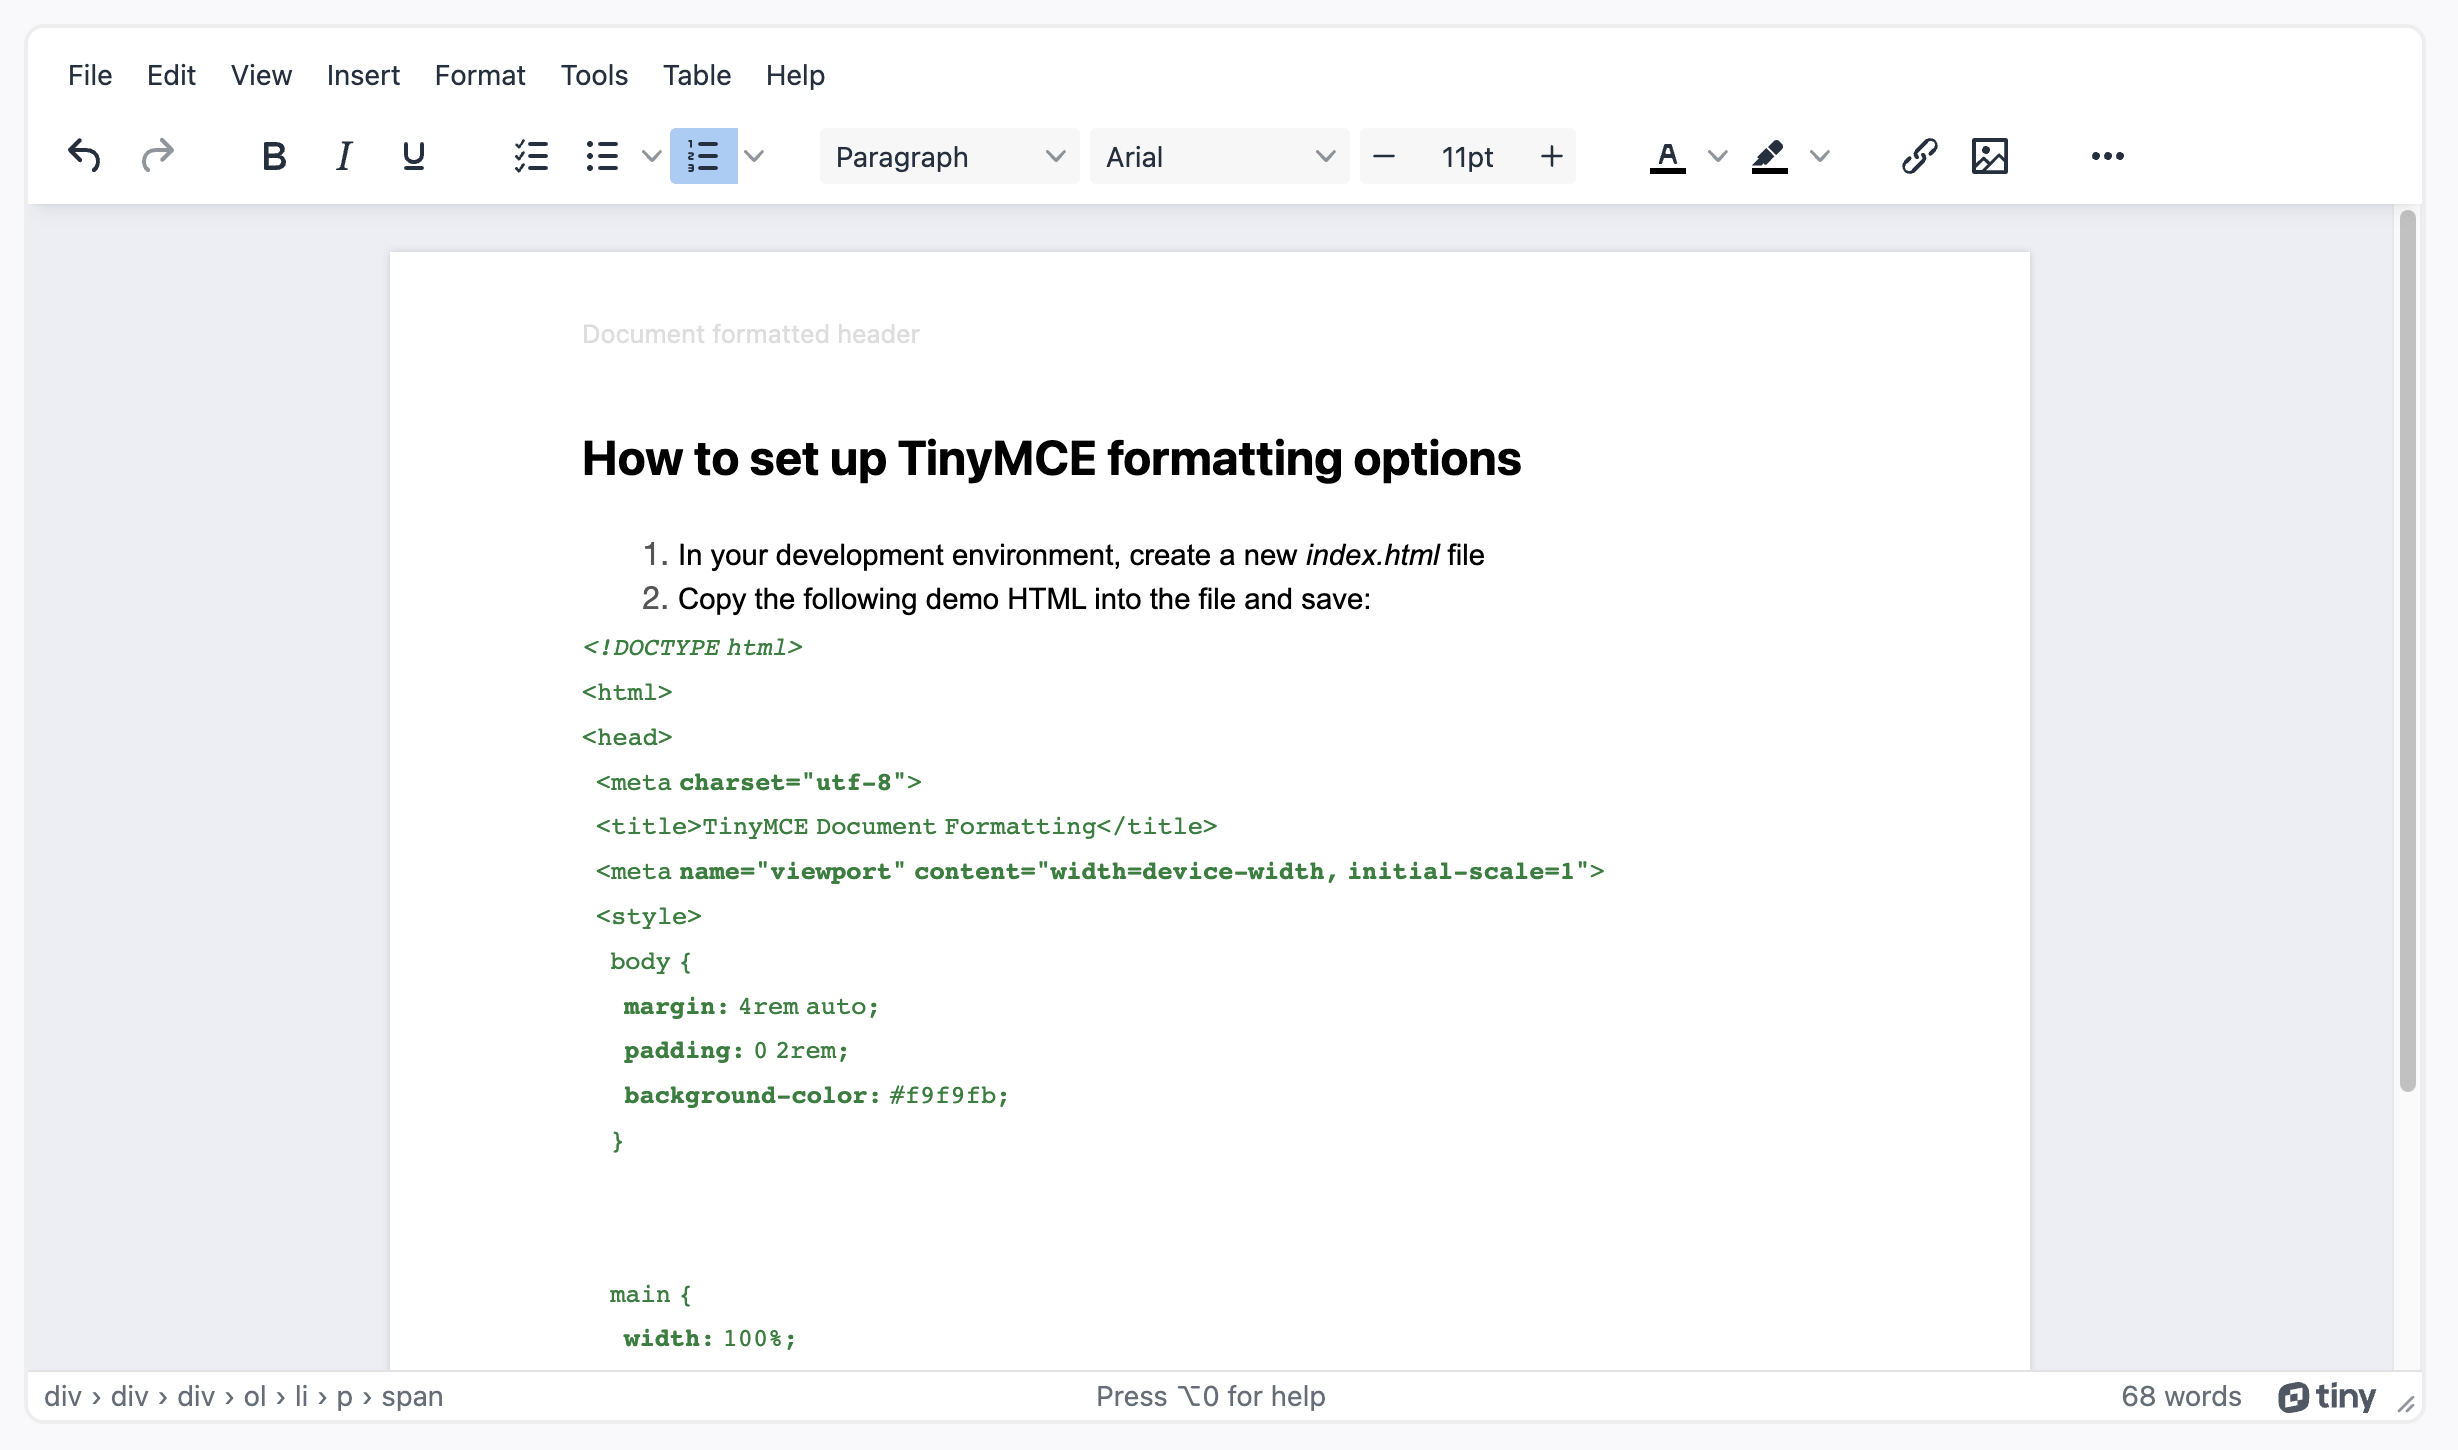 A technical document built using document formatting in TinyMCE